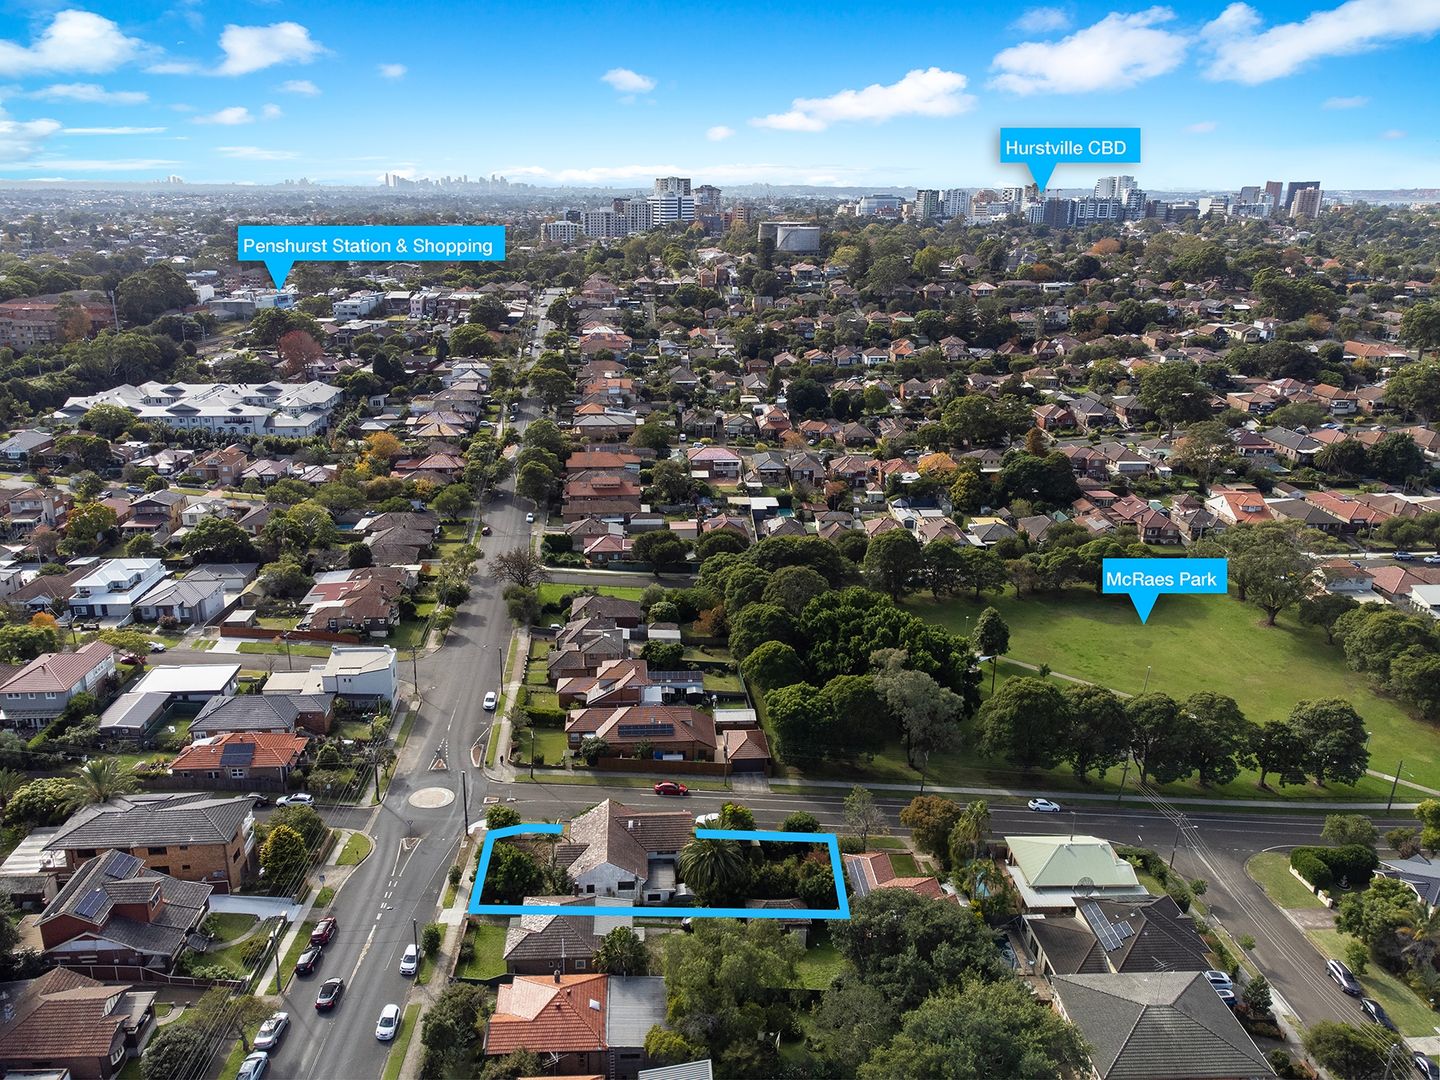 80 Railway Parade, Mortdale NSW 2223